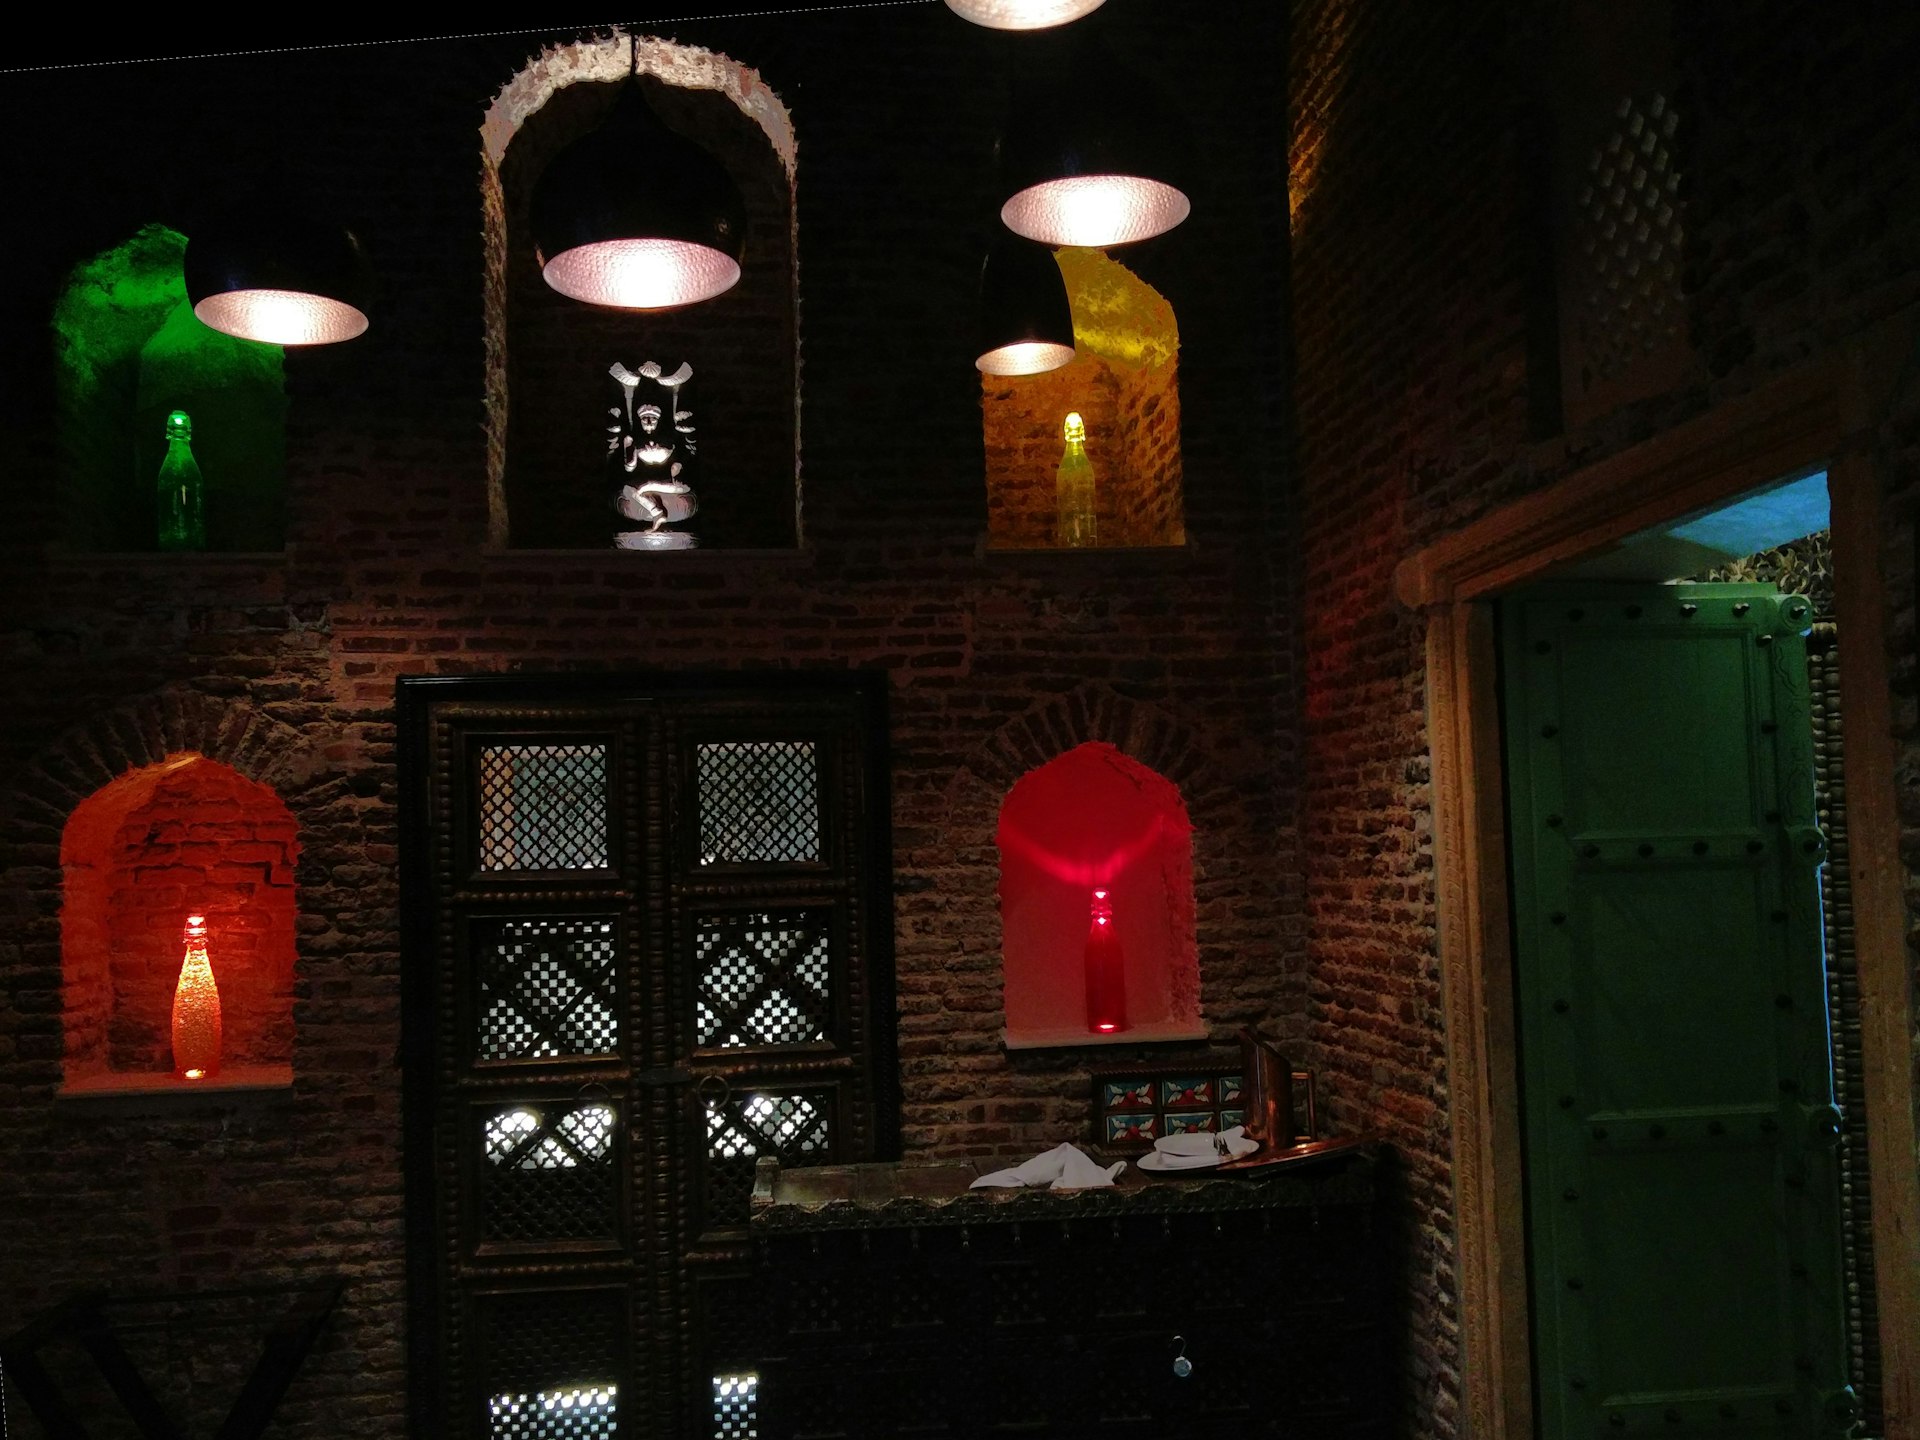 Moody interiors at Lakhori in Old Delhi © Puneetinder Kaur Sidhu / Lonely Planet